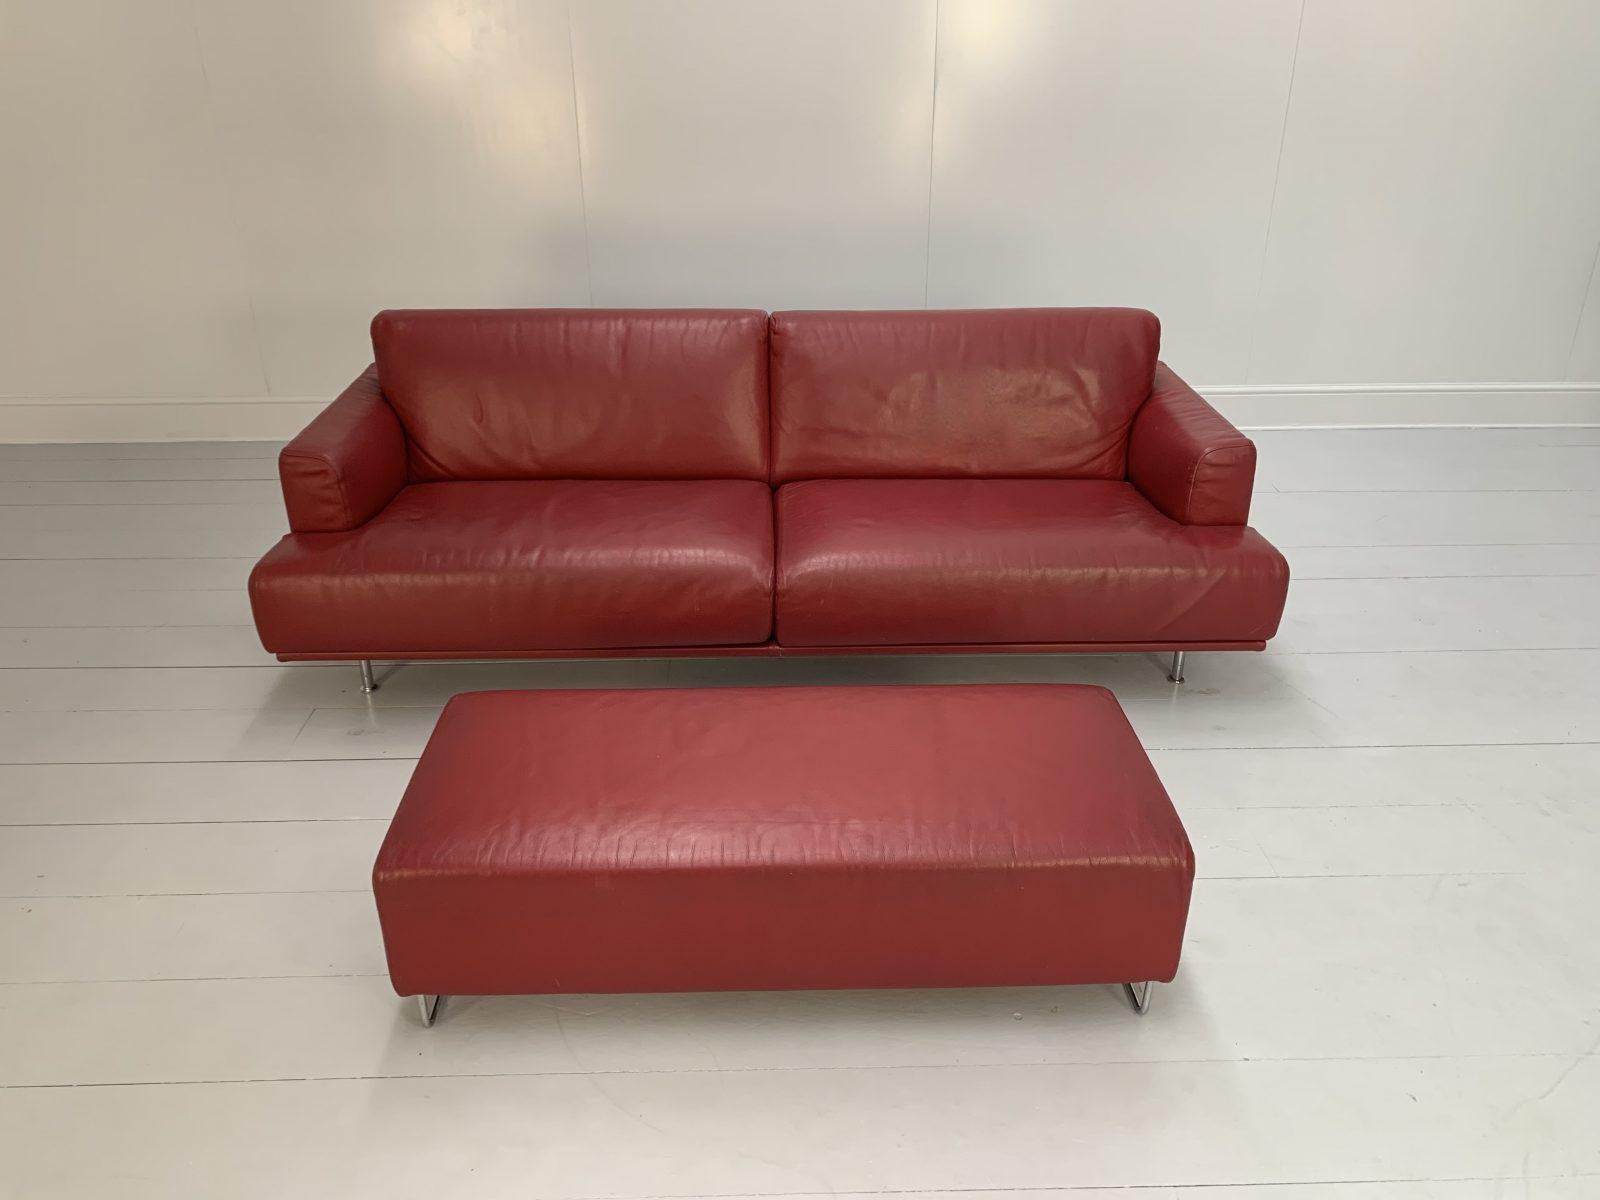 Cassina “253 Nest” 2.5-Seat Sofa & Bench Footstool – In Red “Pelle” Leather In Good Condition In Barrowford, GB